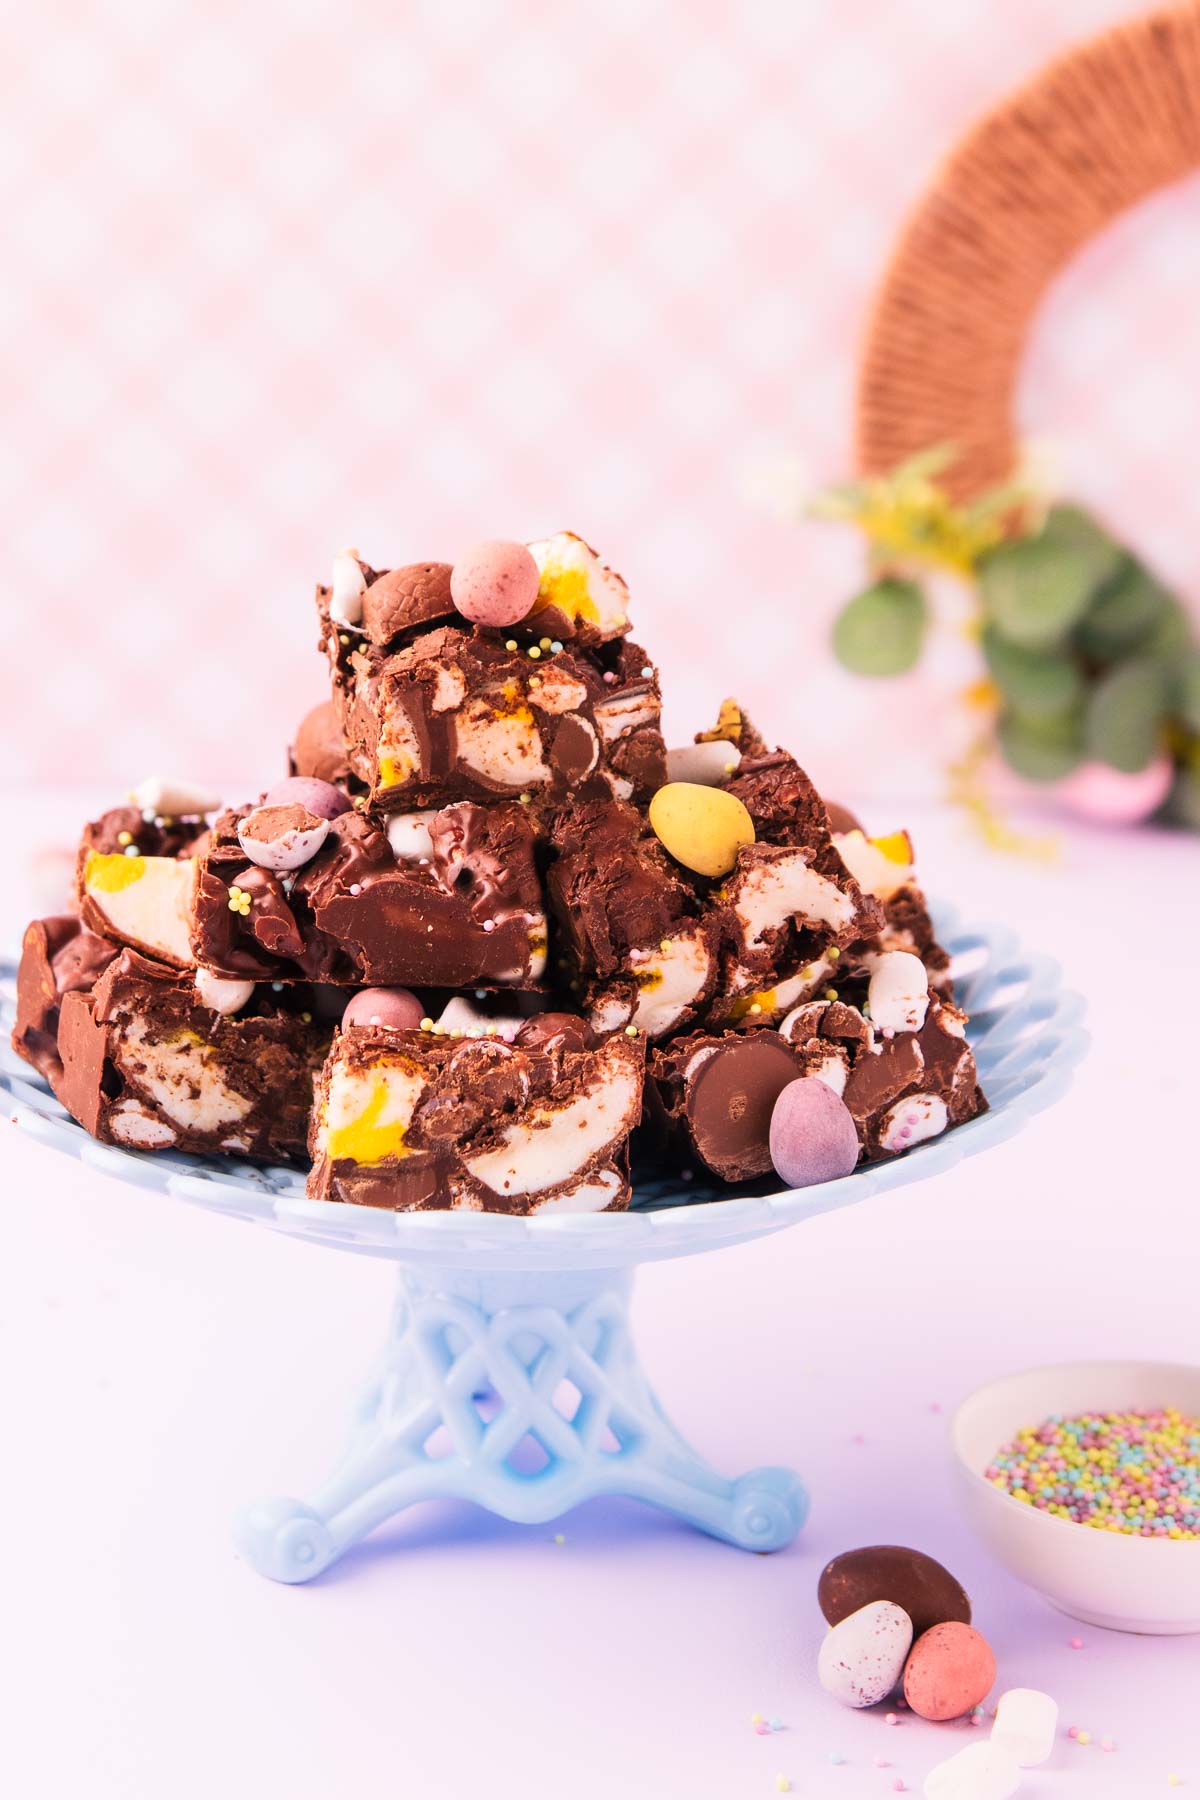 Pieces of Easter egg rocky road piled on a blue basketweave-patterned milk glass cake stand, against a pink and white checkered background, with mini eggs and sprinkles scattered around.